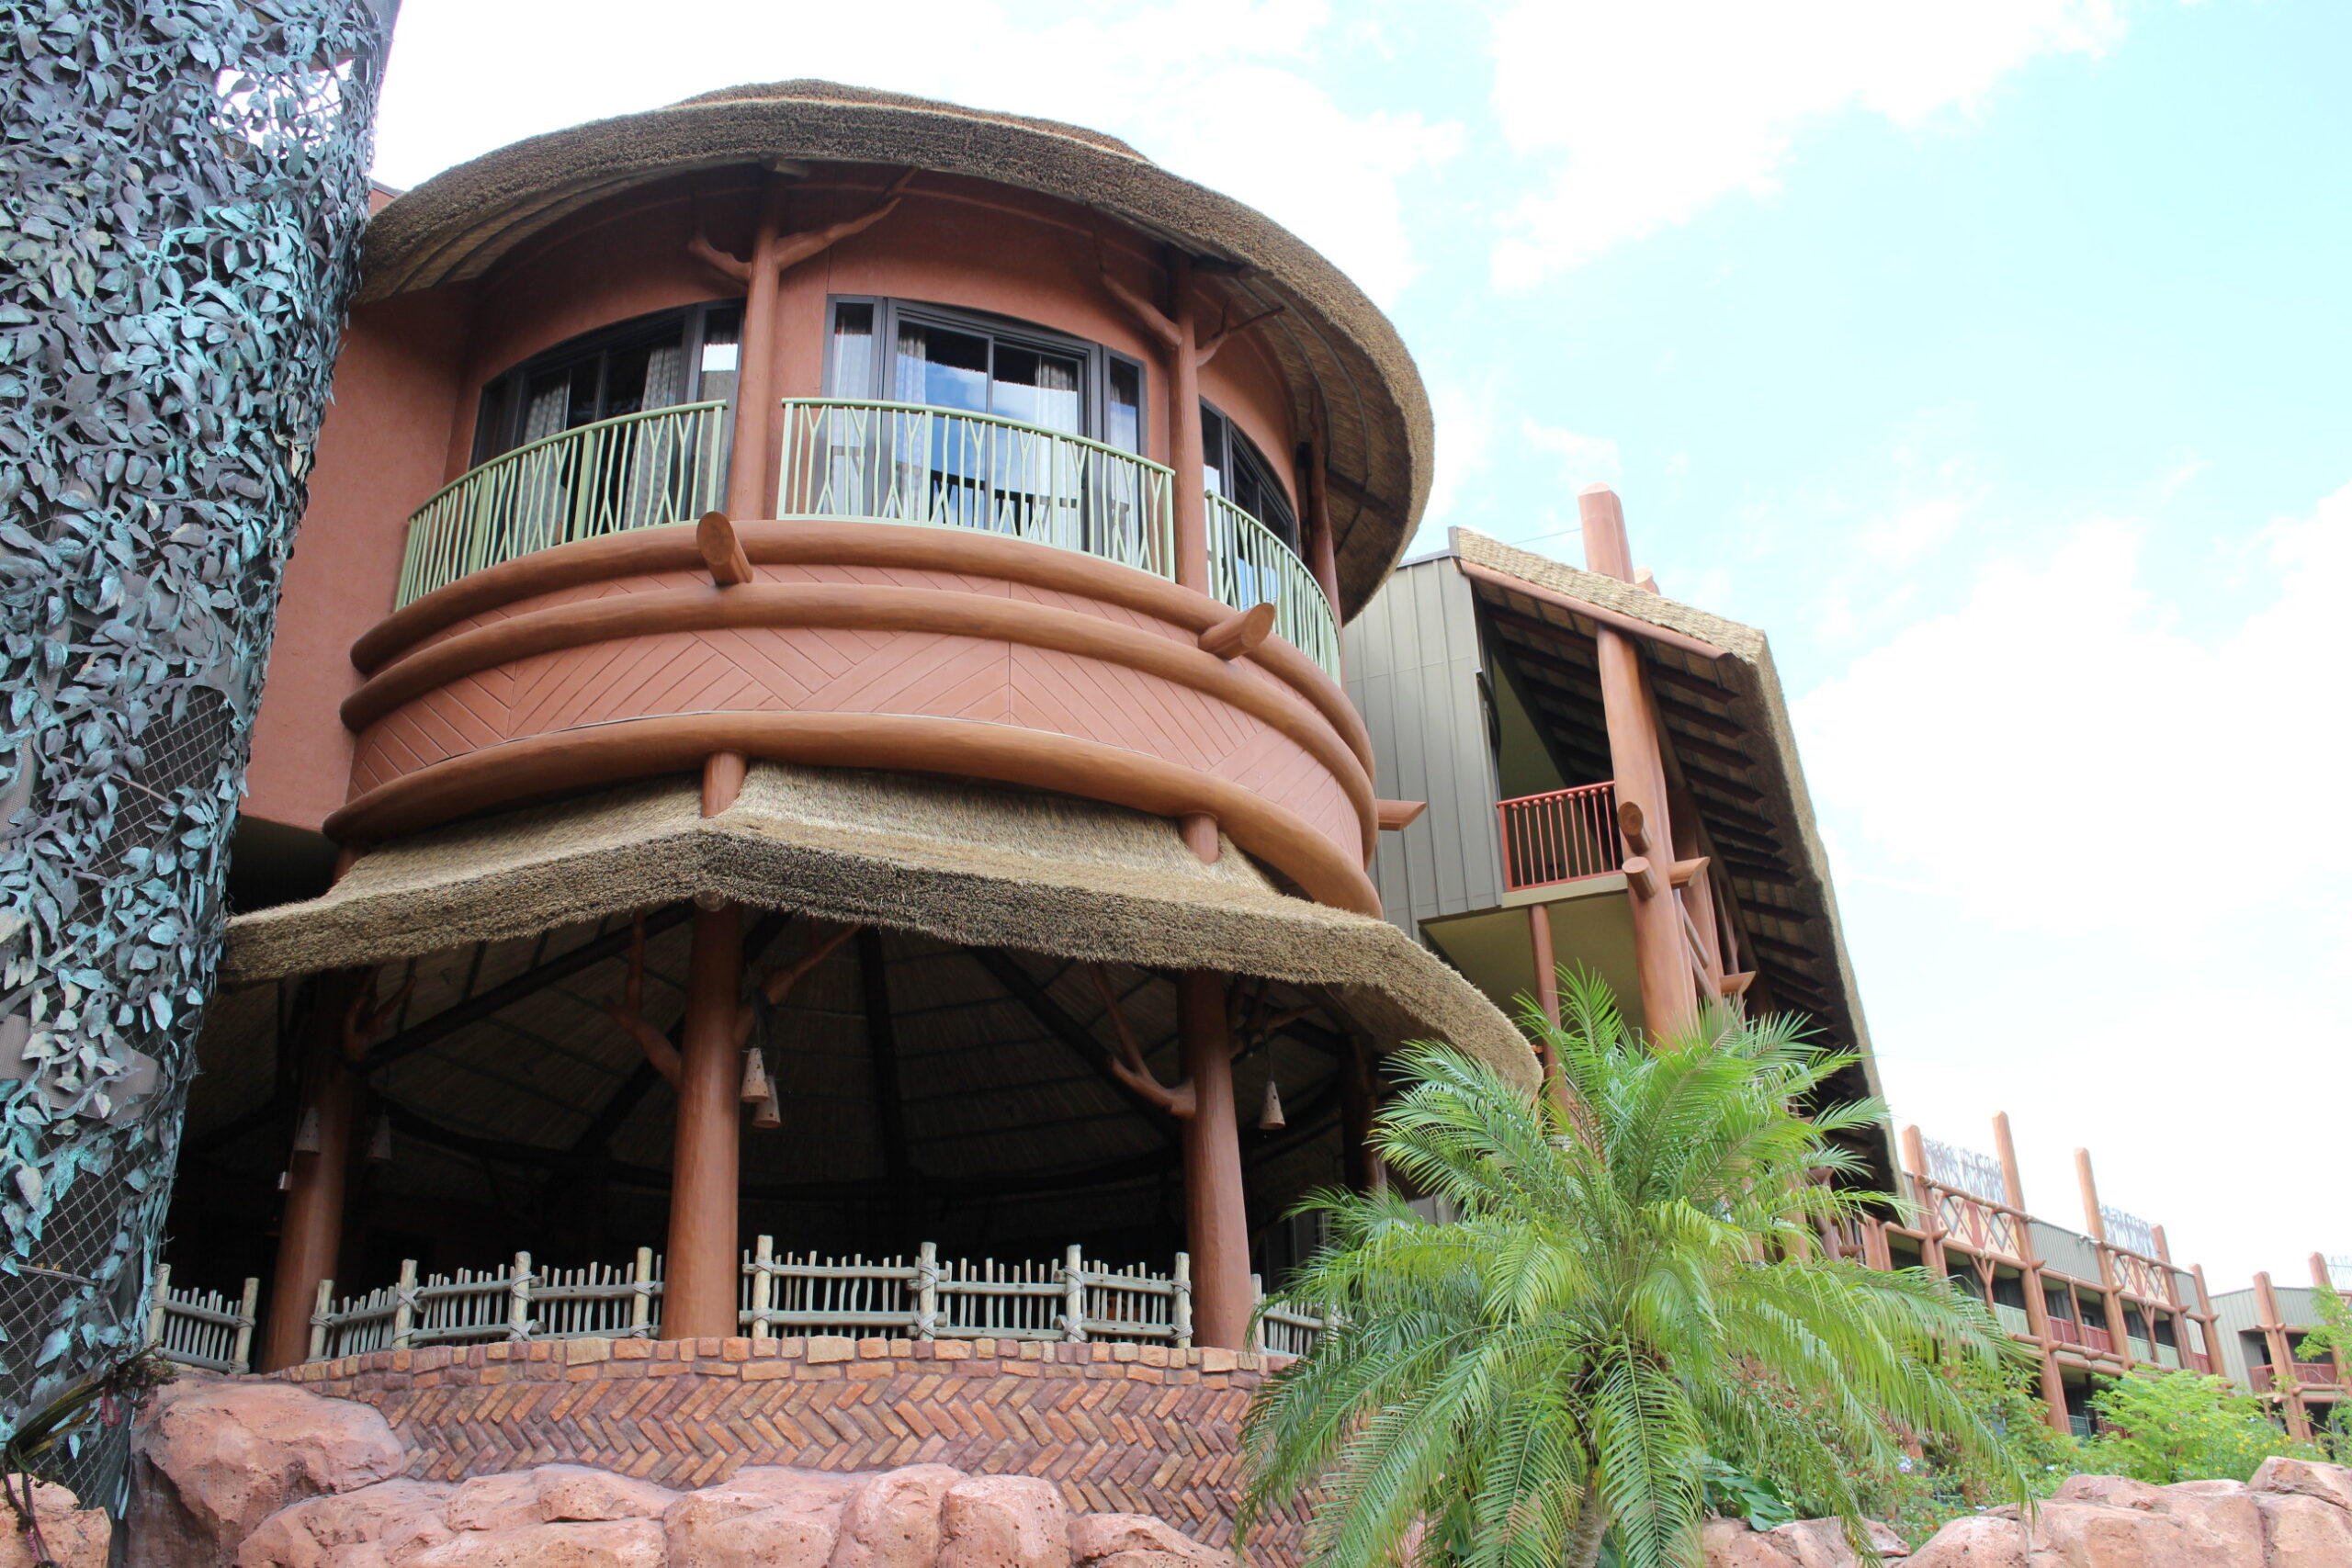 Jambo House Animal Kingdom Lodge Resort building African inspired building architecture against a blue sky